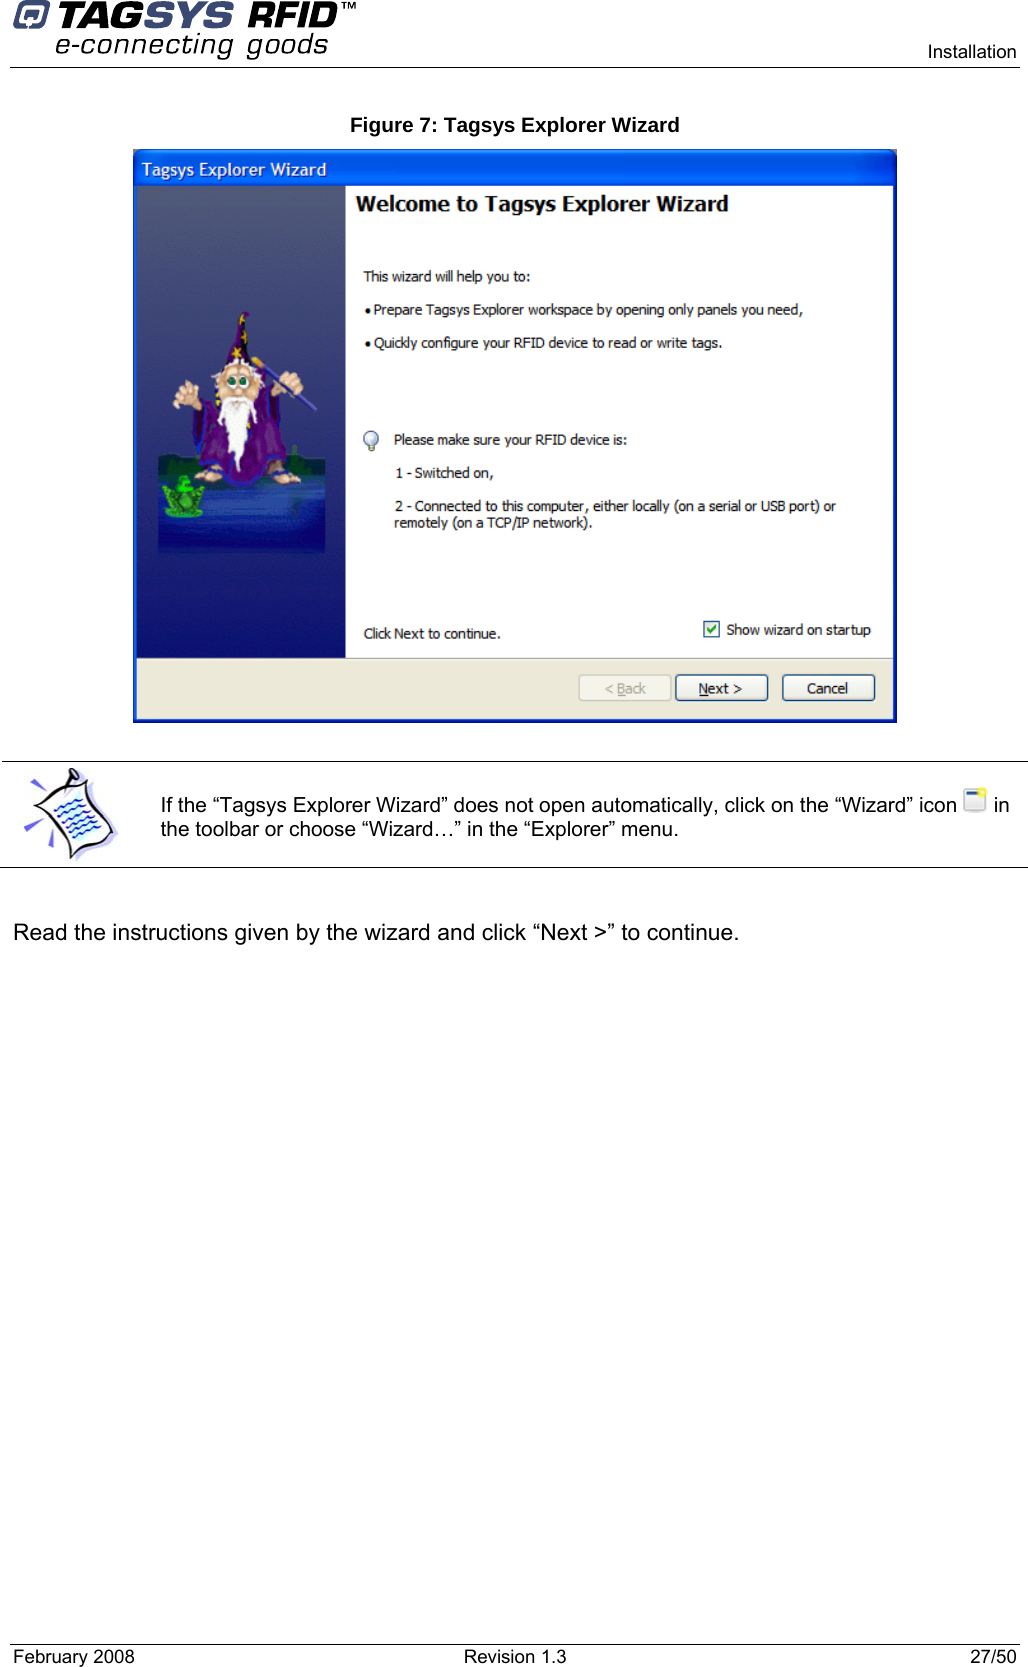      Installation February 2008  Revision 1.3  27/50  Figure 7: Tagsys Explorer Wizard    If the “Tagsys Explorer Wizard” does not open automatically, click on the “Wizard” icon   in the toolbar or choose “Wizard…” in the “Explorer” menu.  Read the instructions given by the wizard and click “Next &gt;” to continue.  